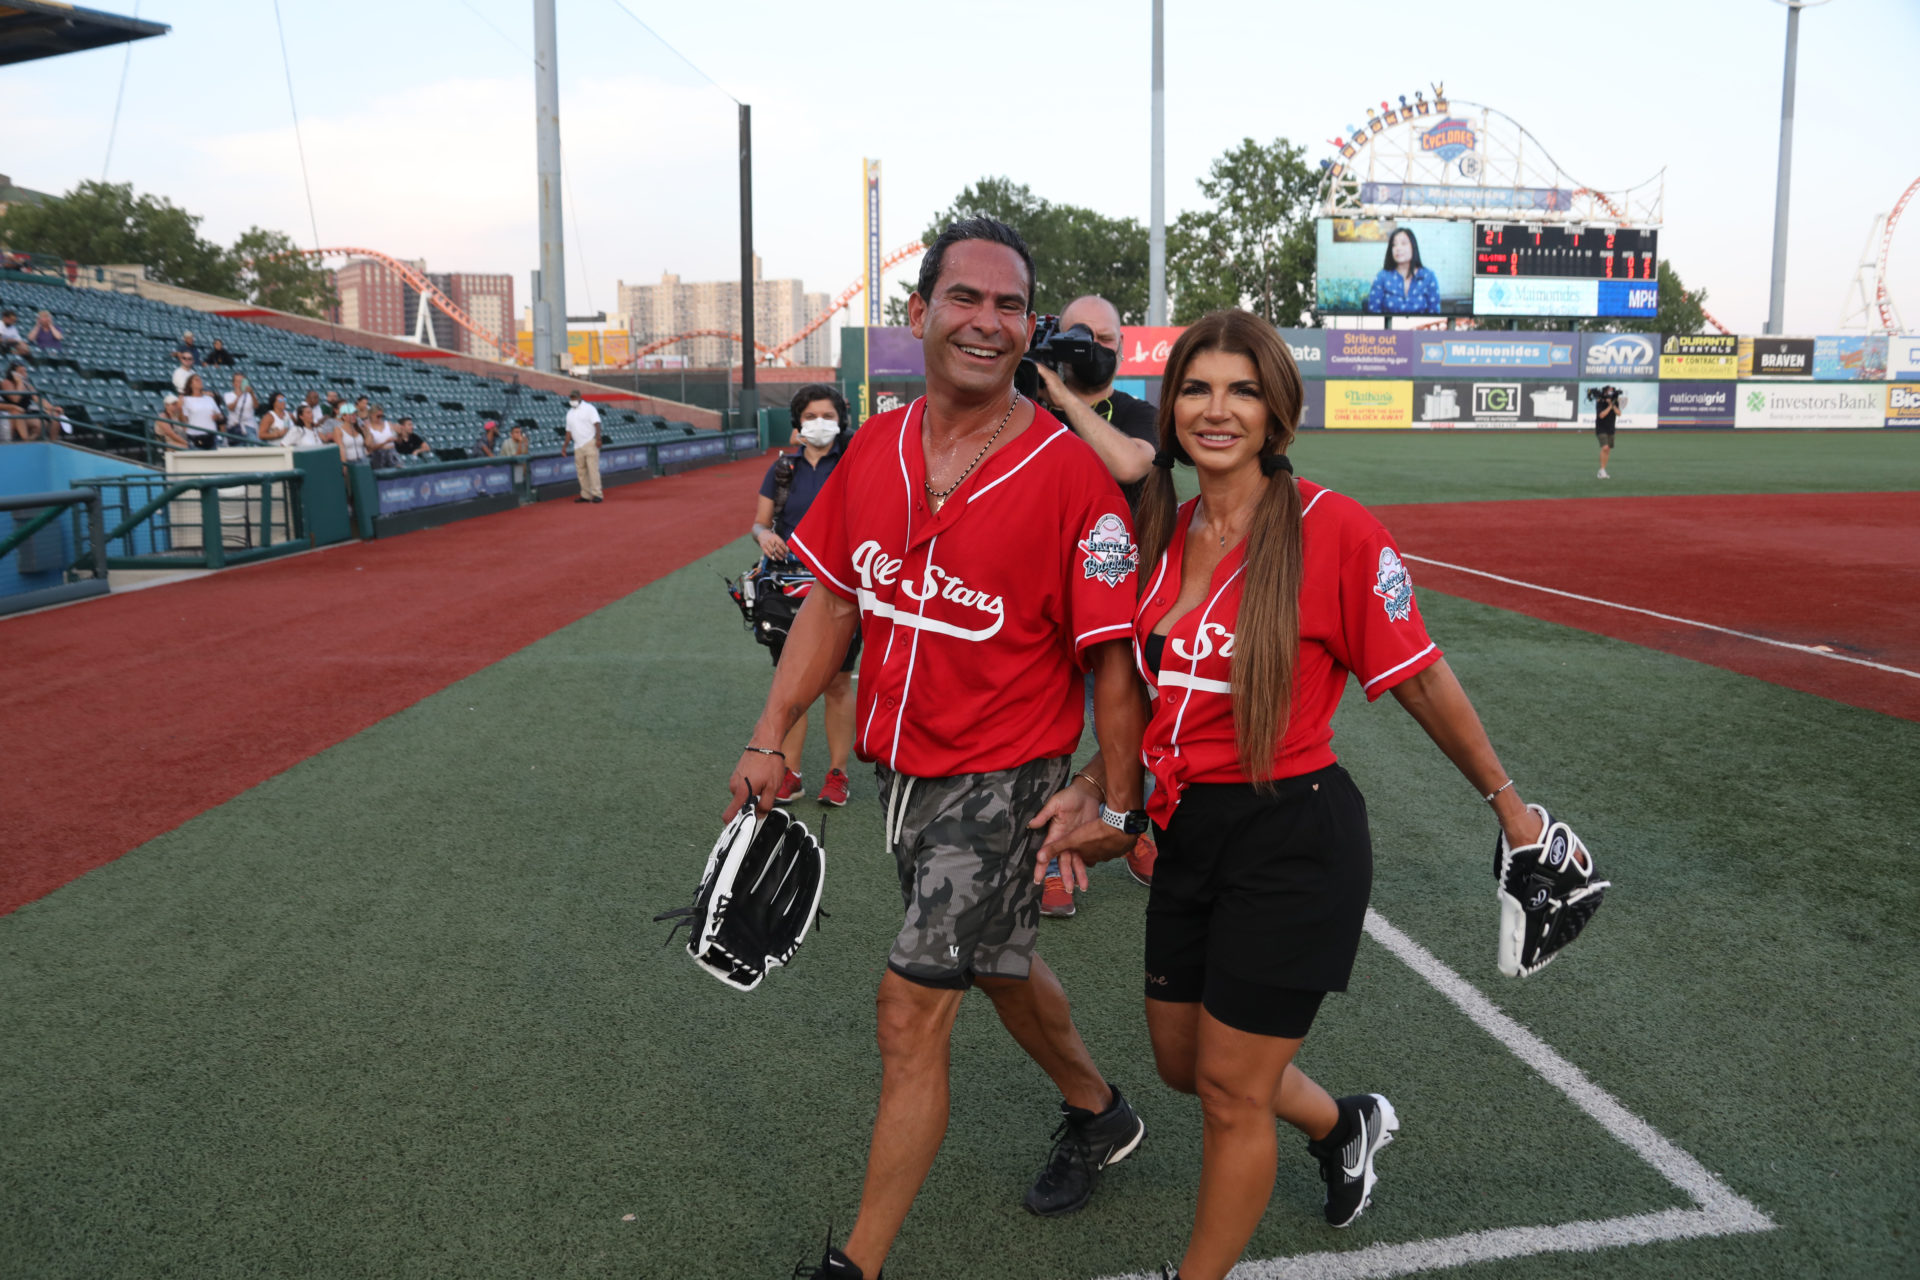 Cast Of Real Housewives Of New Jersey & Healthcare Heroes Charity Softball Game